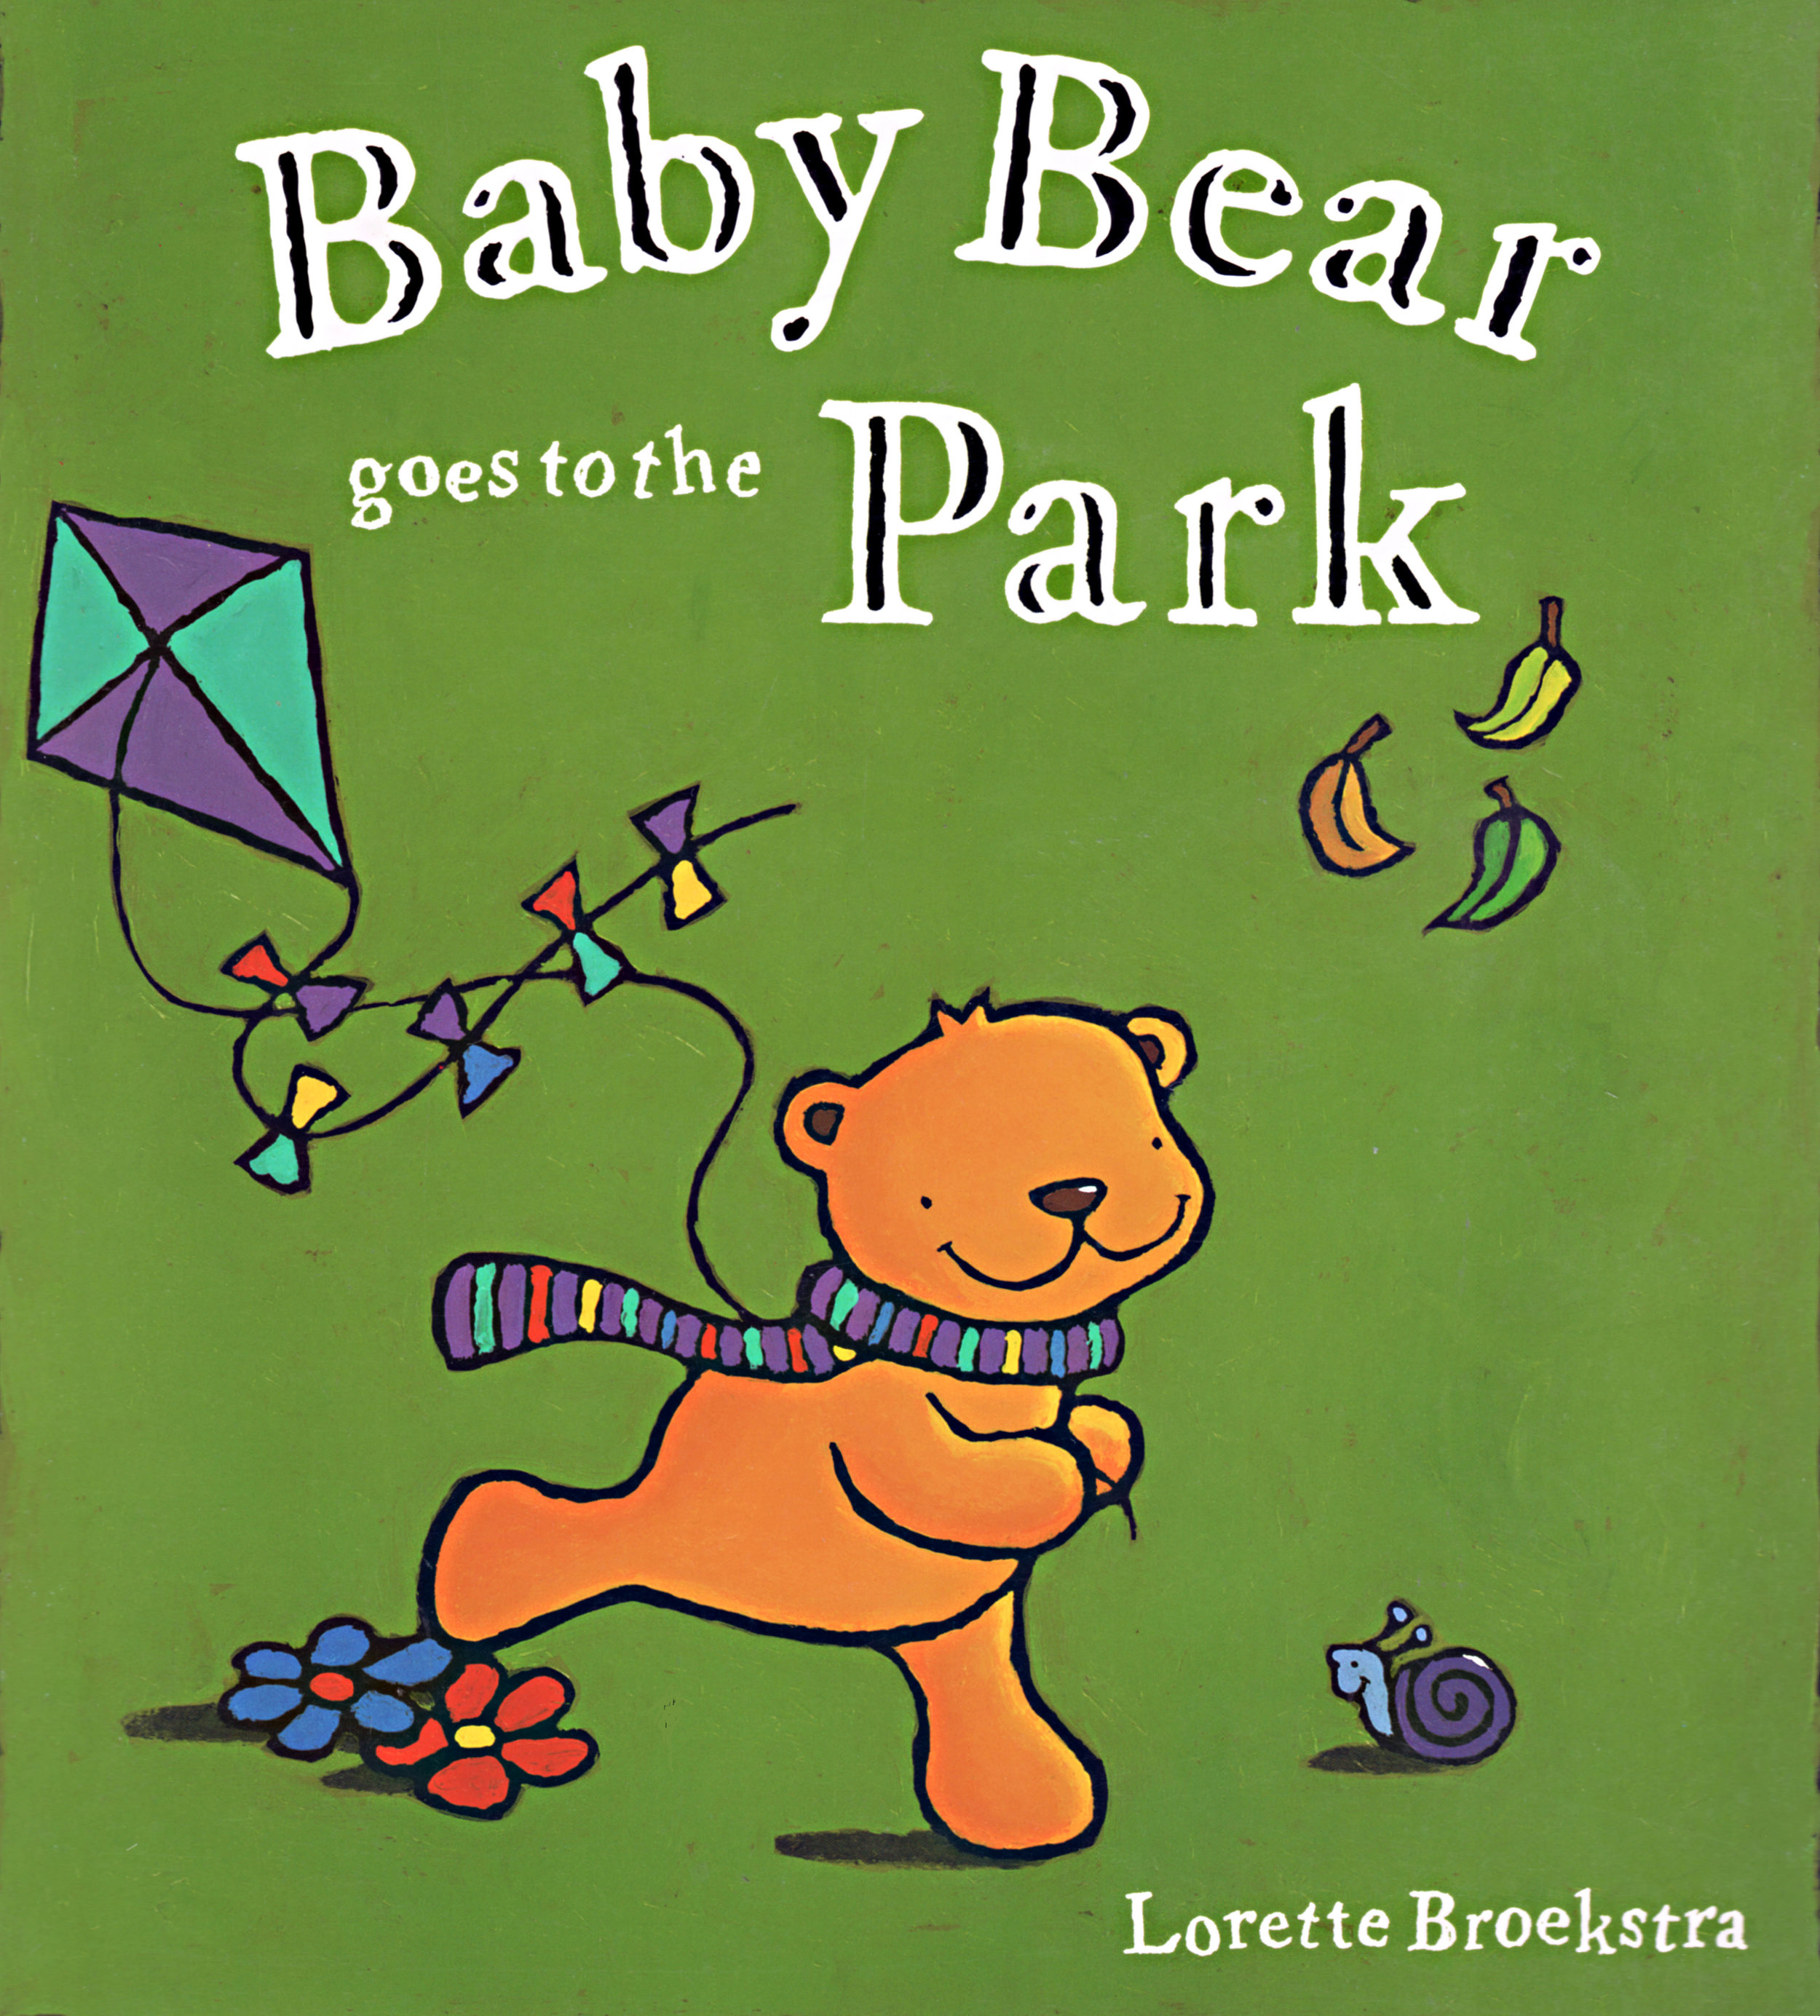 Baby Bear goes to the Park